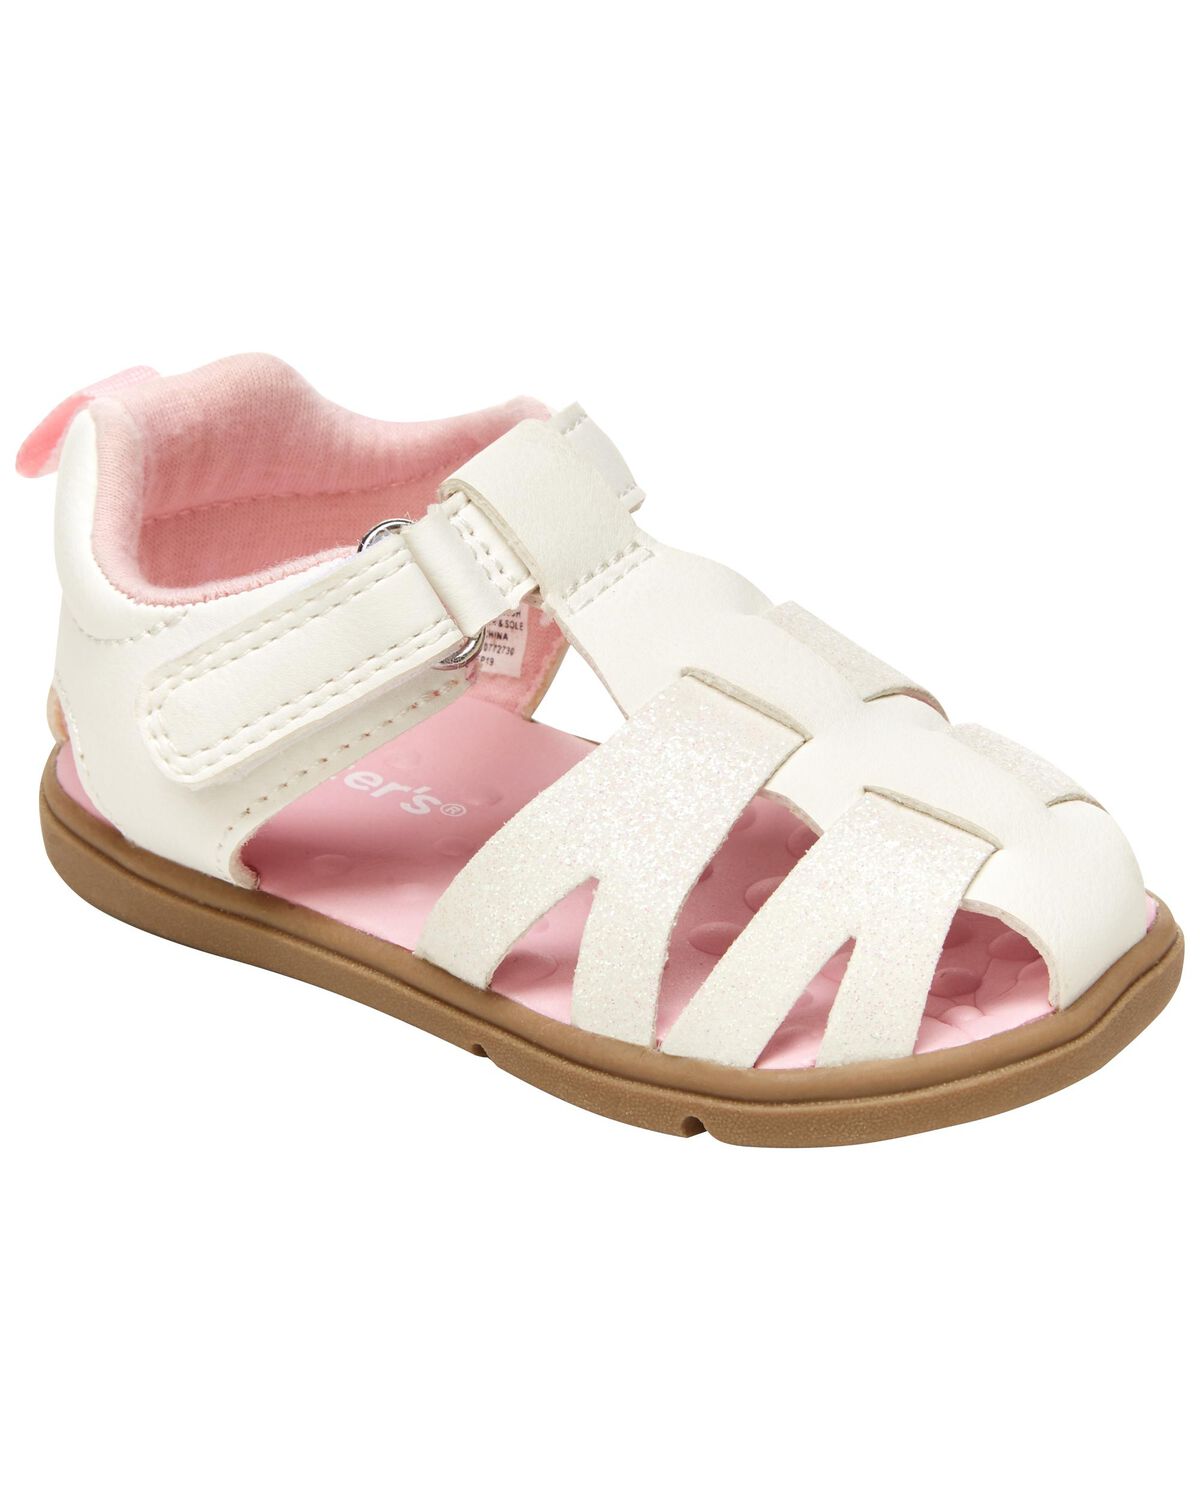 White Baby Every Step Fisherman Sandals | carters.com